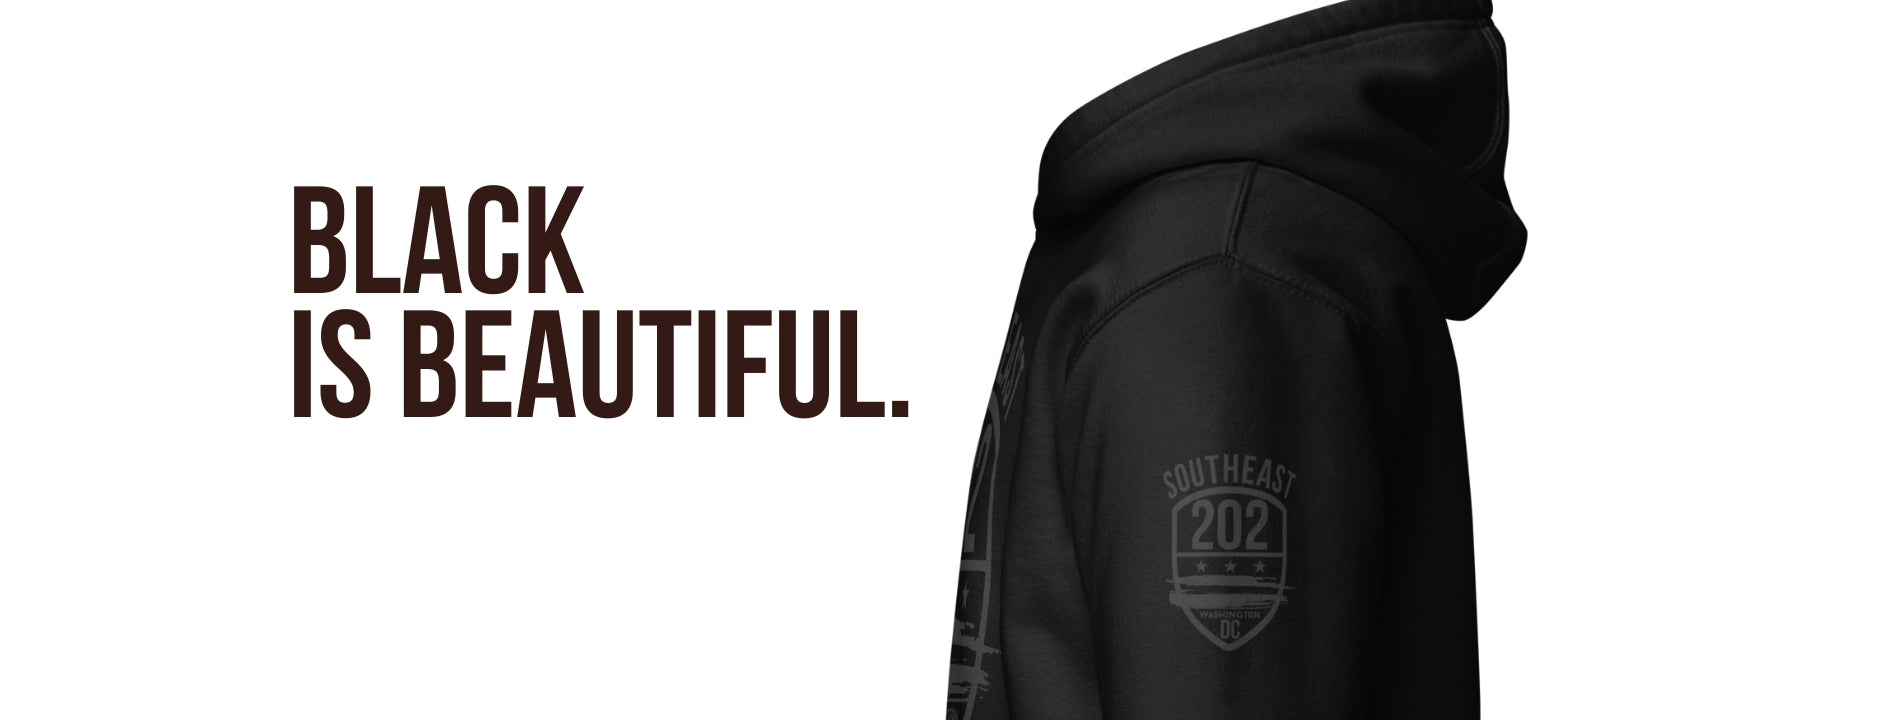 BLACK IS BEAUTIFUL. Get Black on Black Hoodies and Tees from our Celebrate Southeast DC Collection